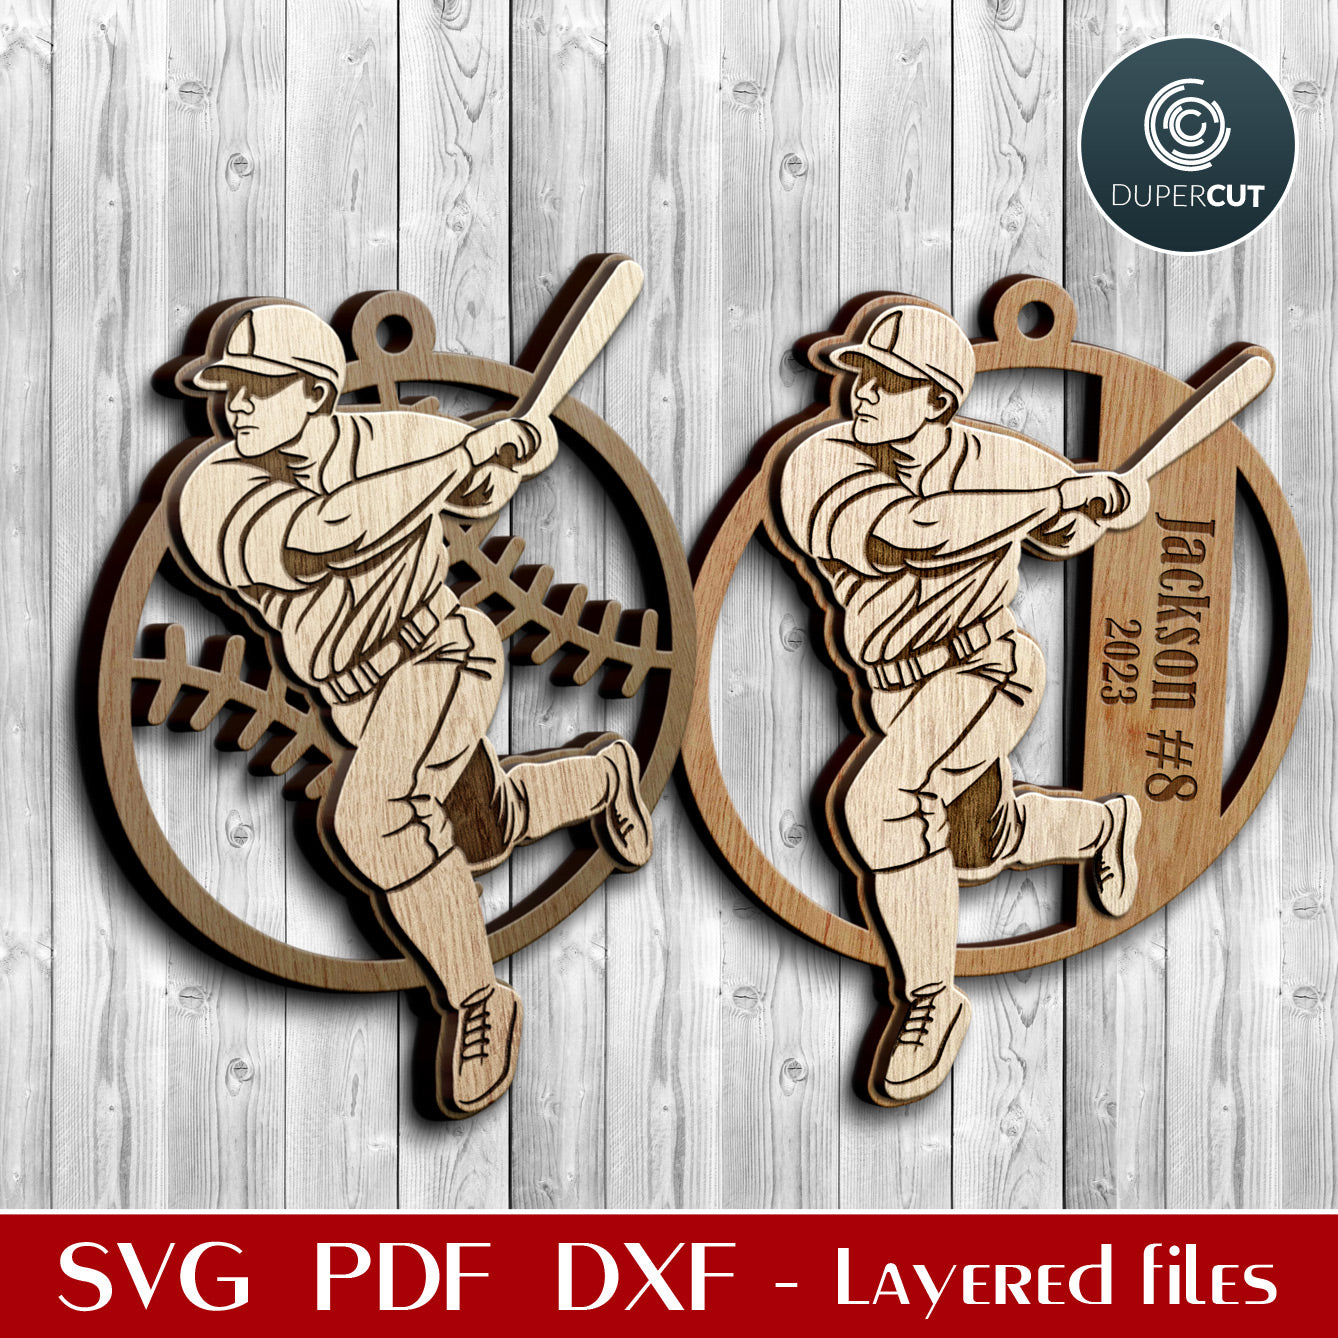 Baseball player sport Christmas ornament, cut and engrave - SVG vector layered file for Glowforge, Cricut, CNC plasma machines by www.DuperCut.com